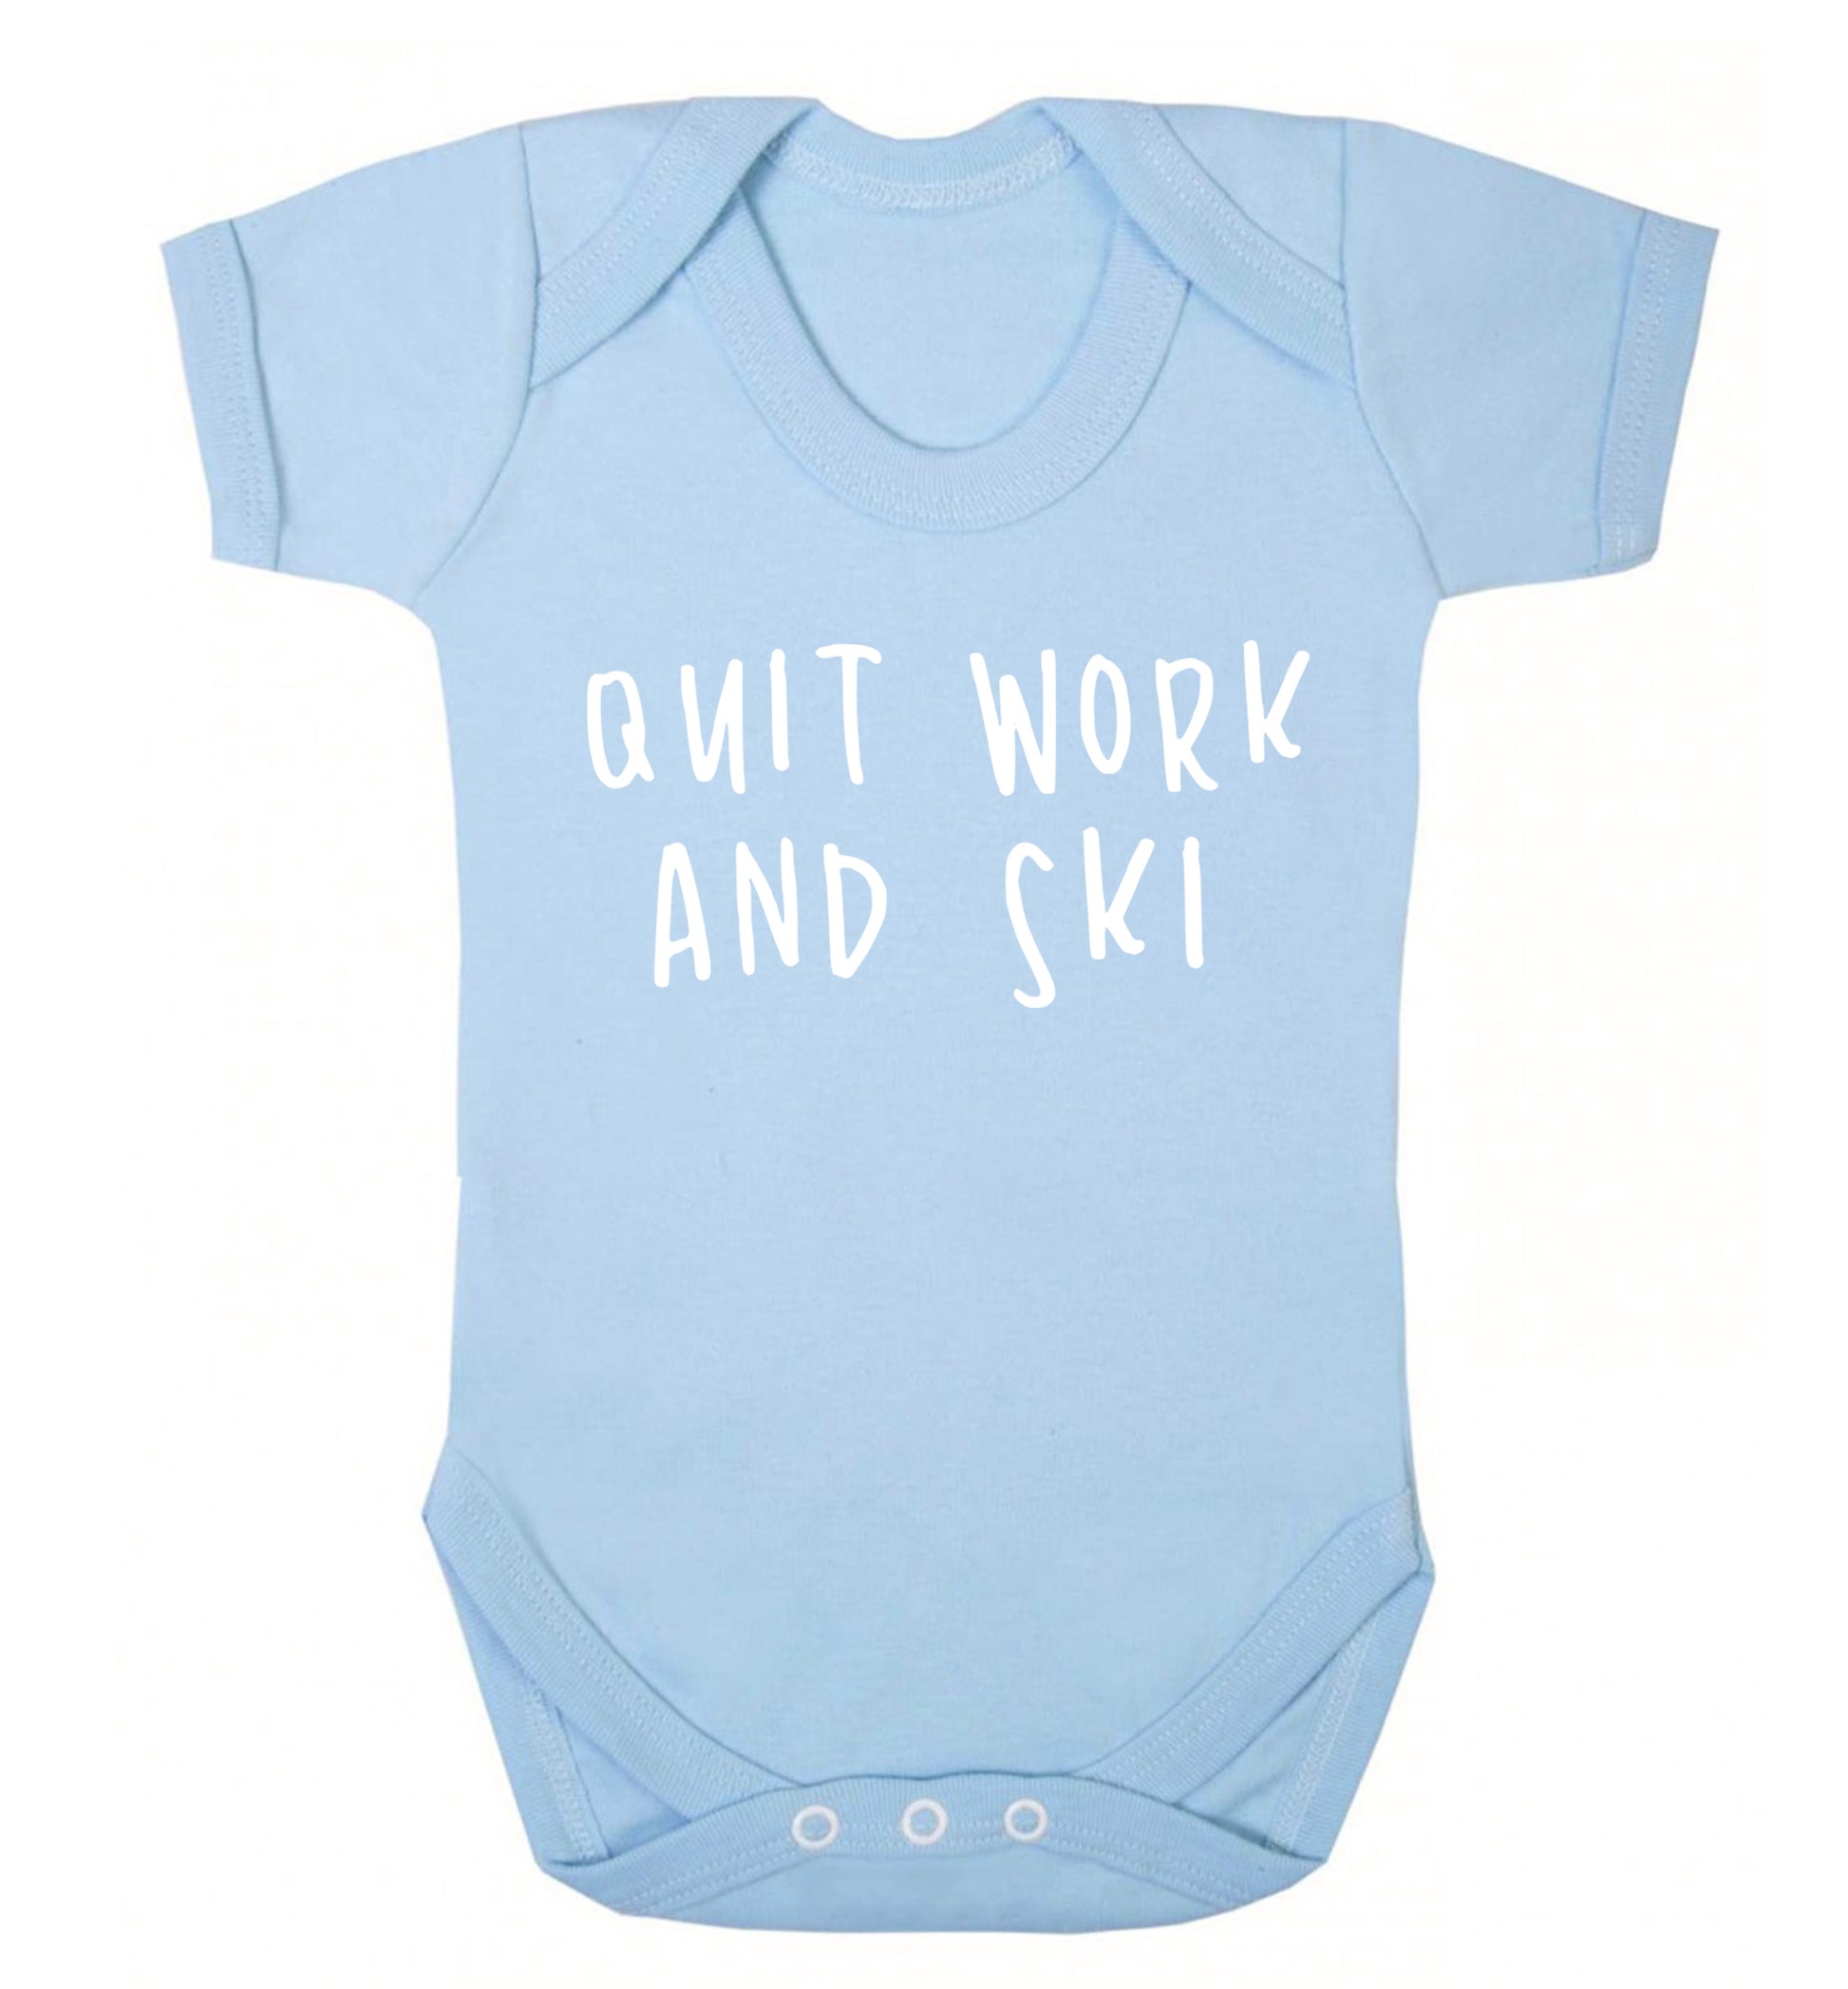 Quit work and ski Baby Vest pale blue 18-24 months